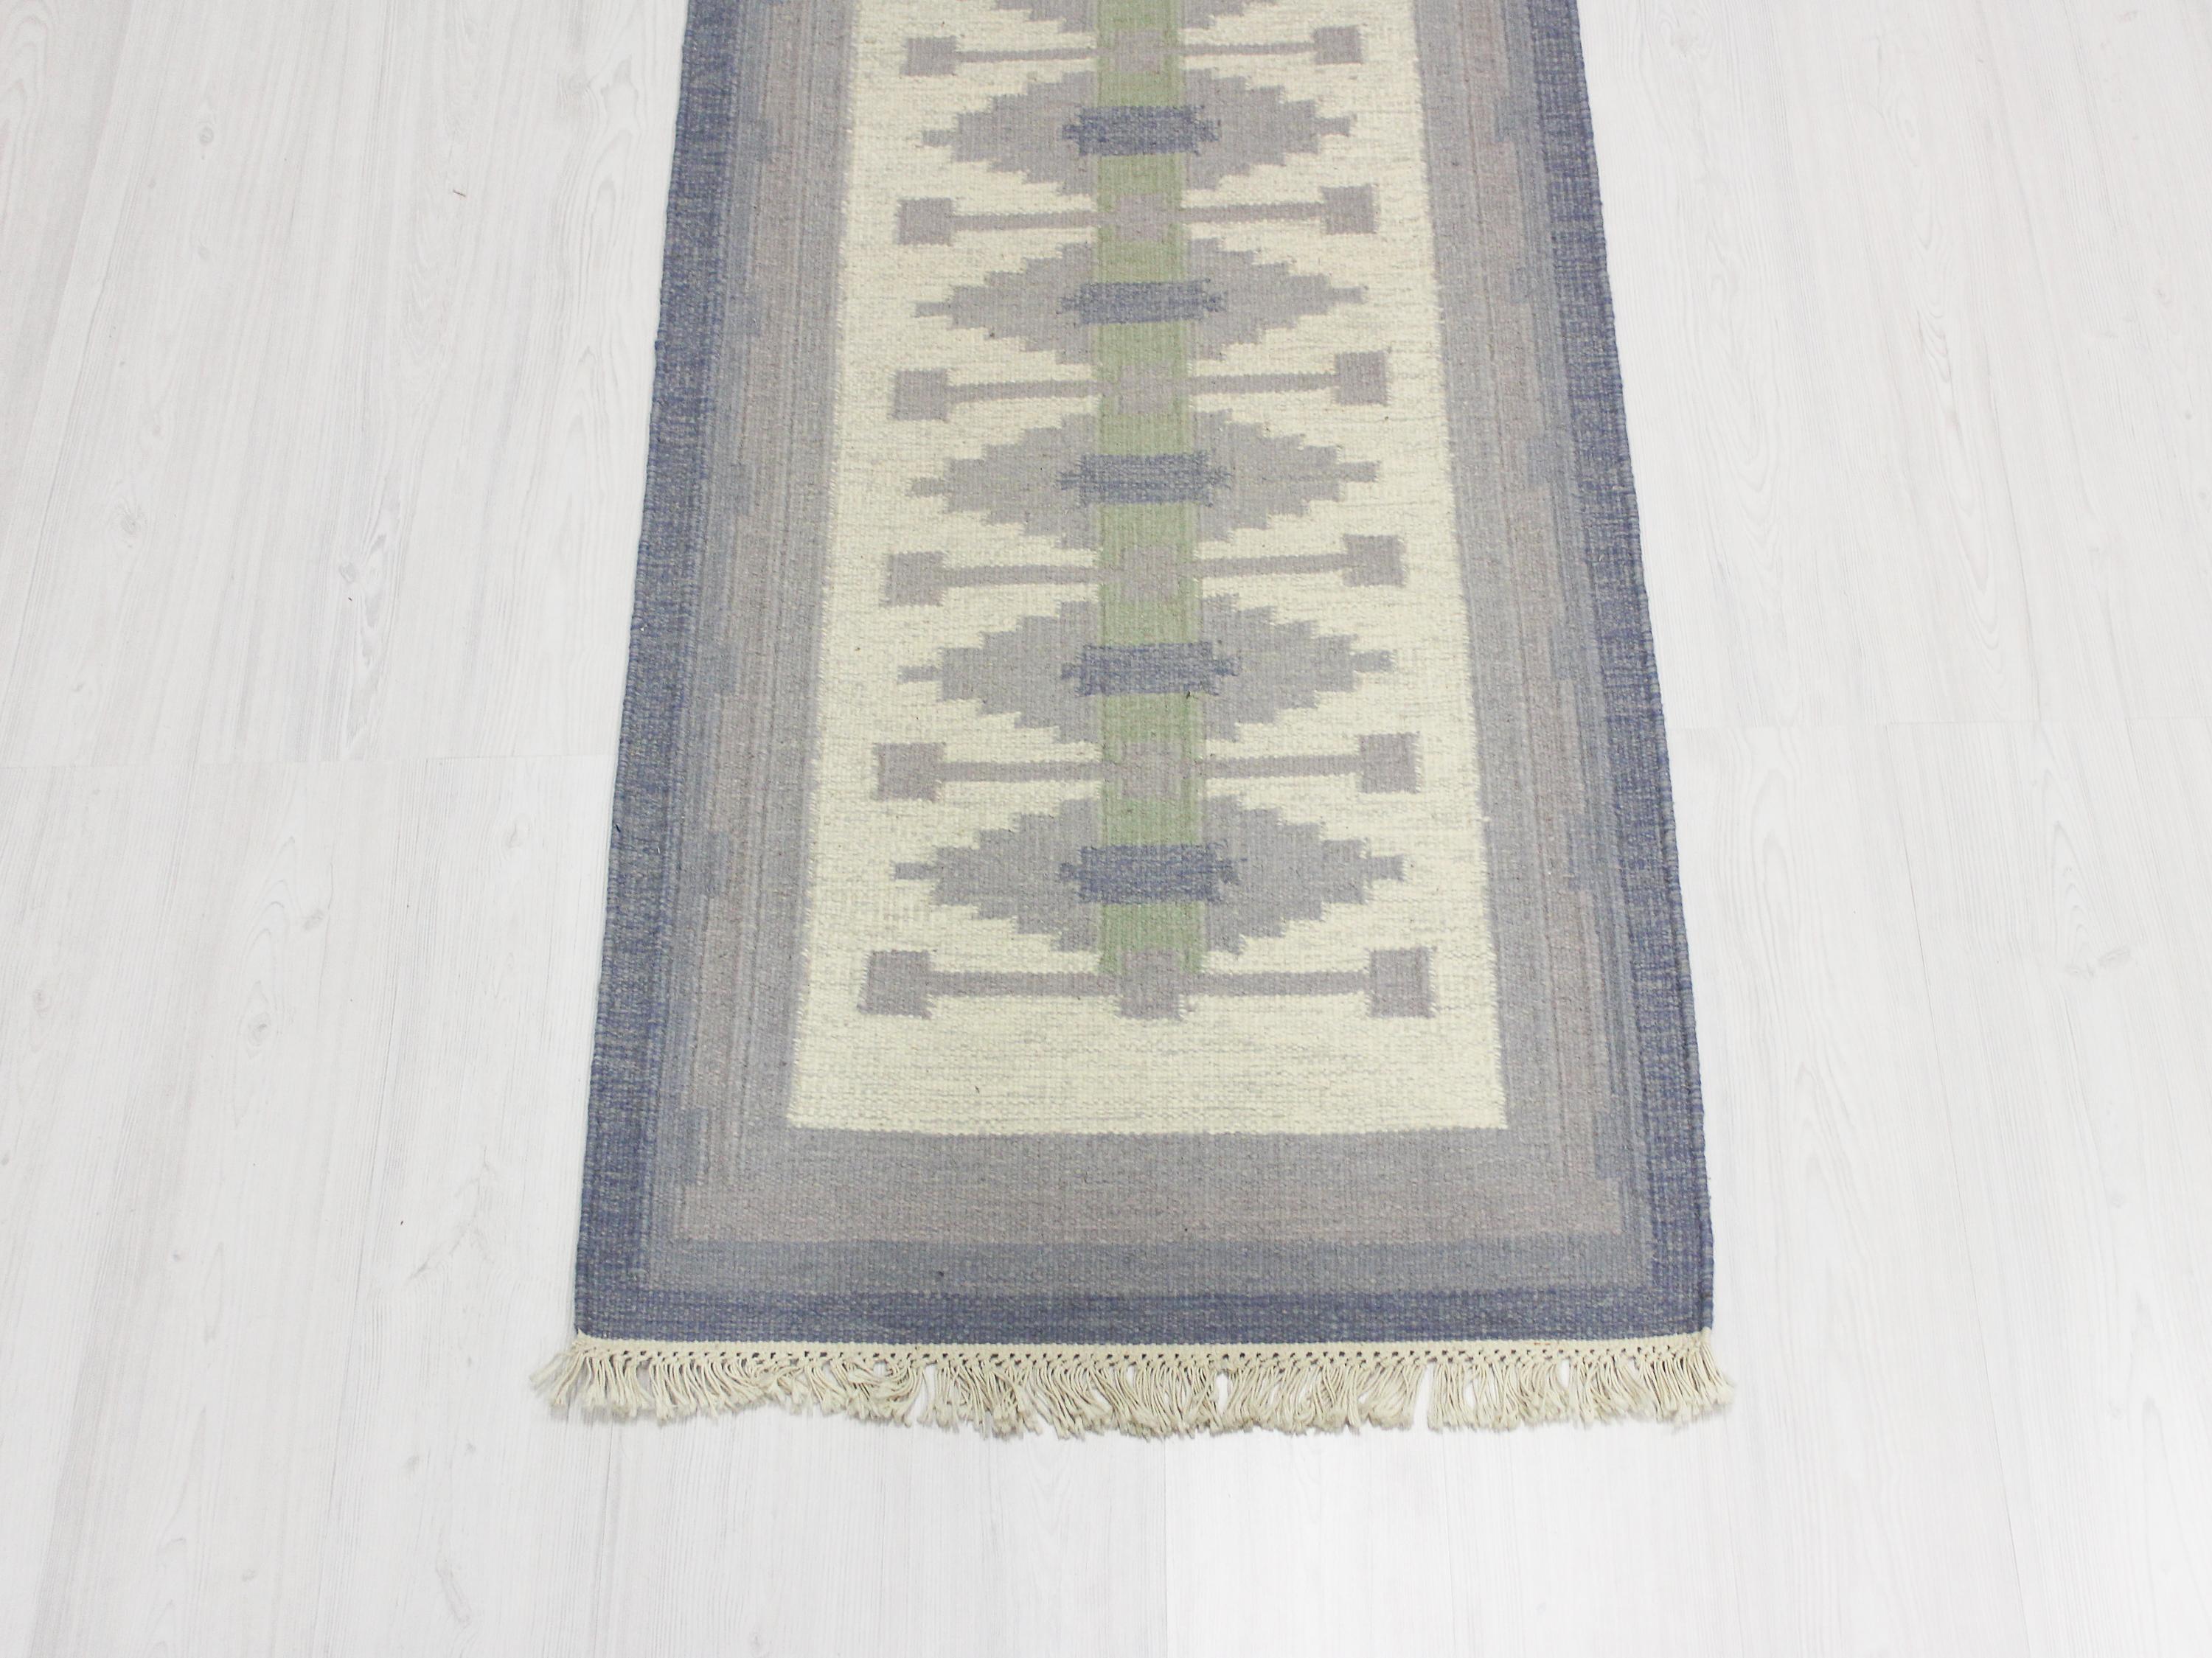 A midcentury gallery flat-weave carpet with geometrical patterns. Excellent vintage condition.